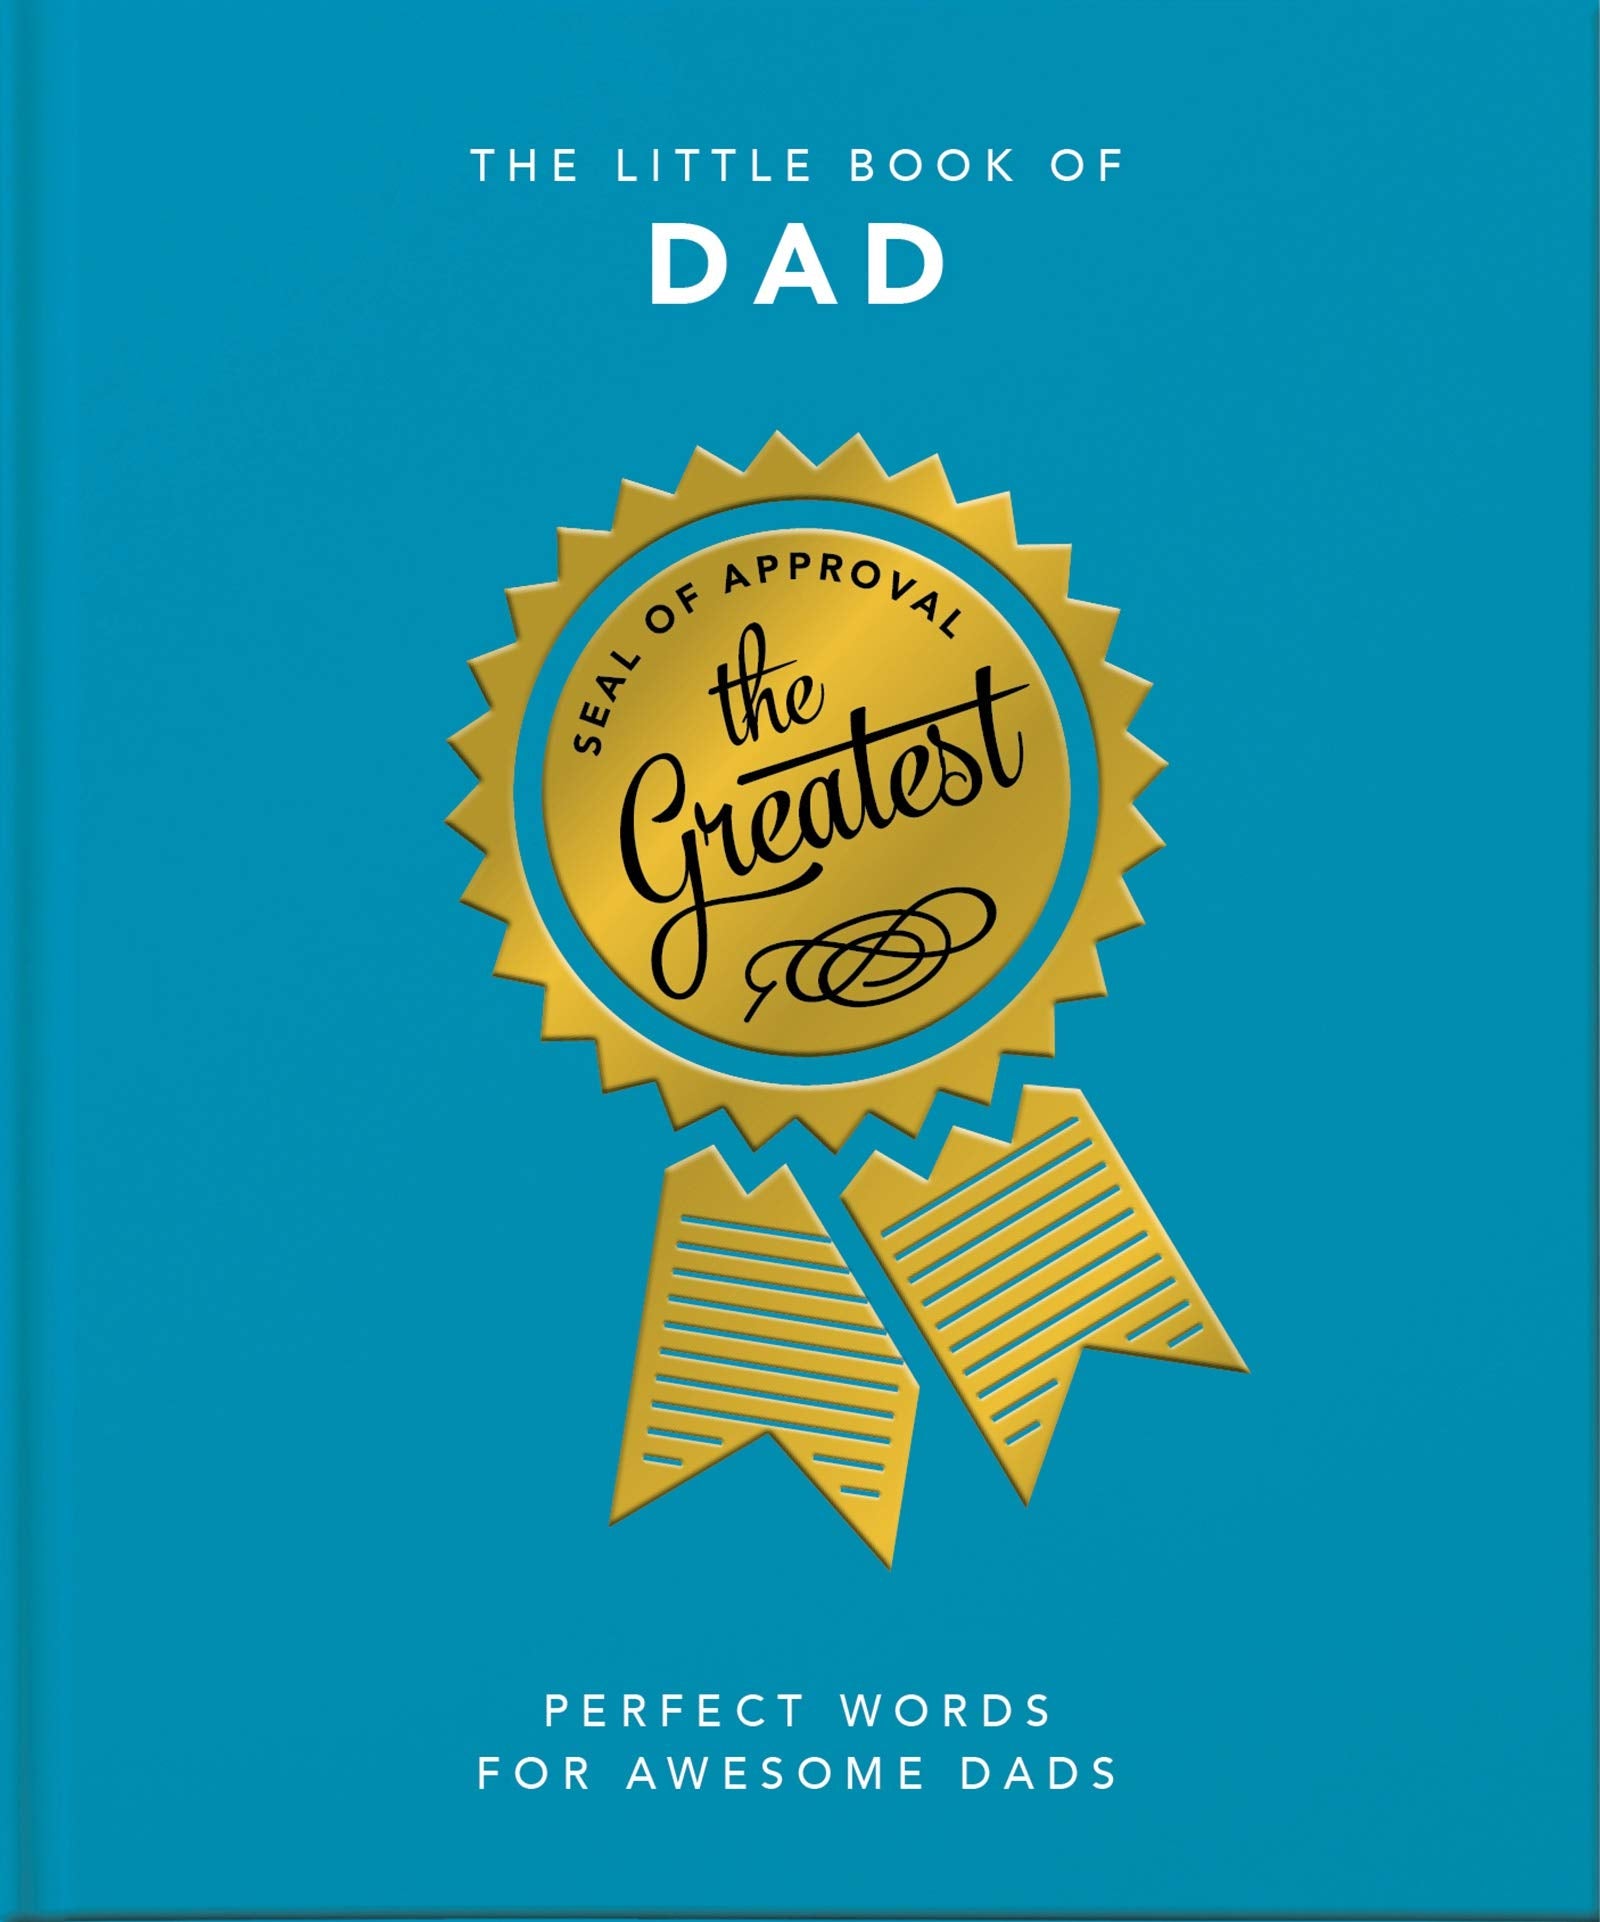 THE LITTLE BOOK OF DAD